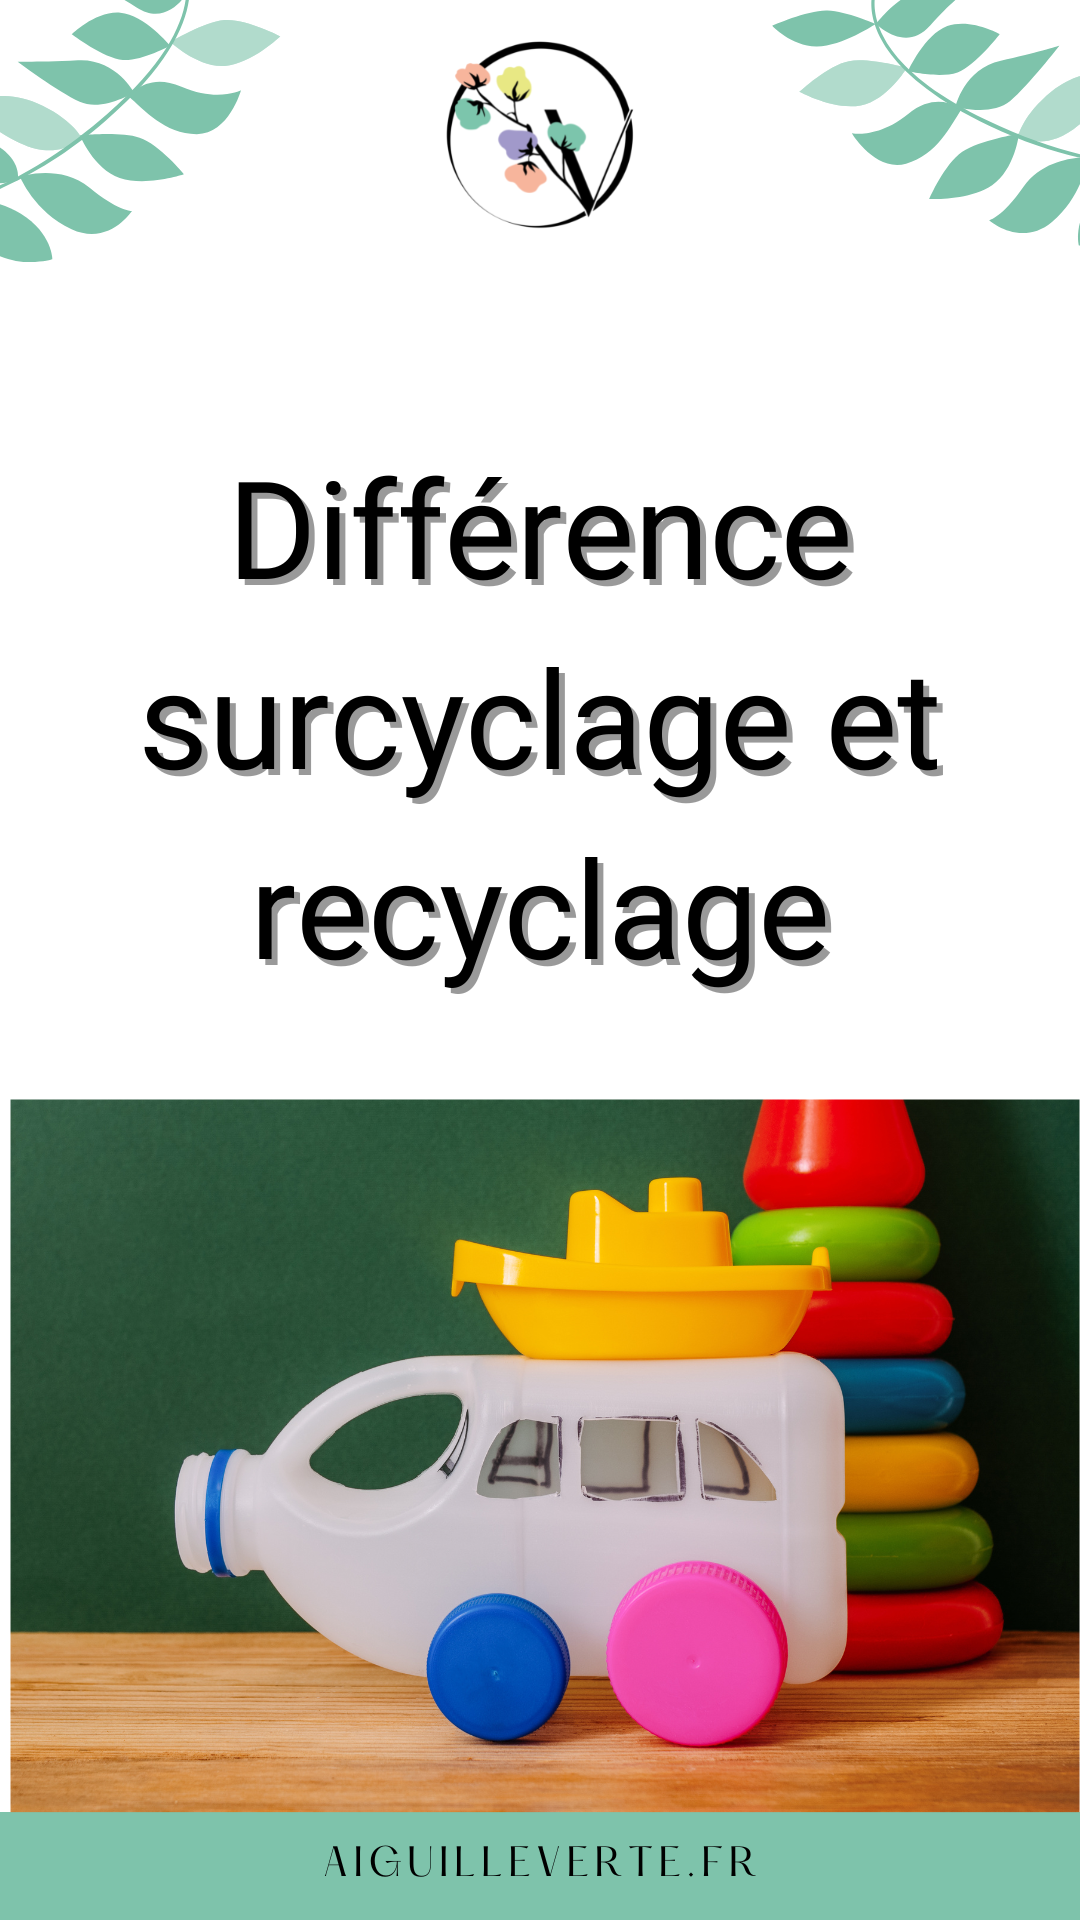 Upcycling ou recyclage ?